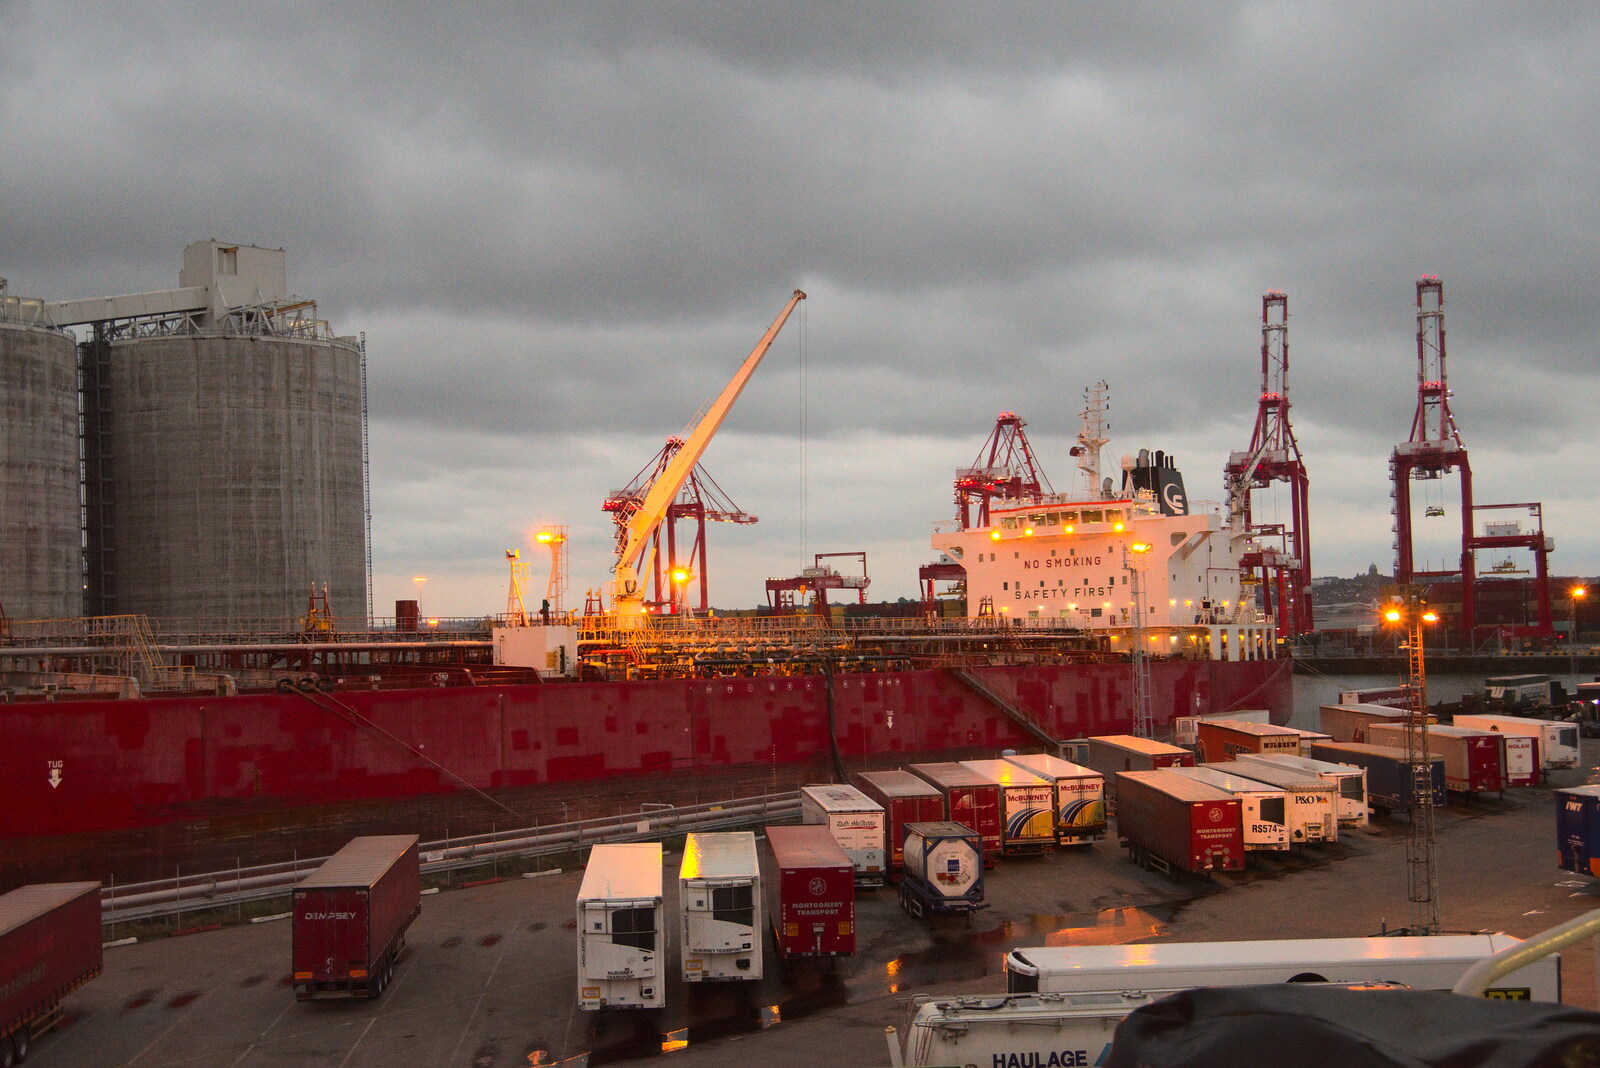 A tanker moored in Liverpool port from Pork Pies and Dockside Dereliction, Melton Mowbray and Liverpool - 7th August 2021